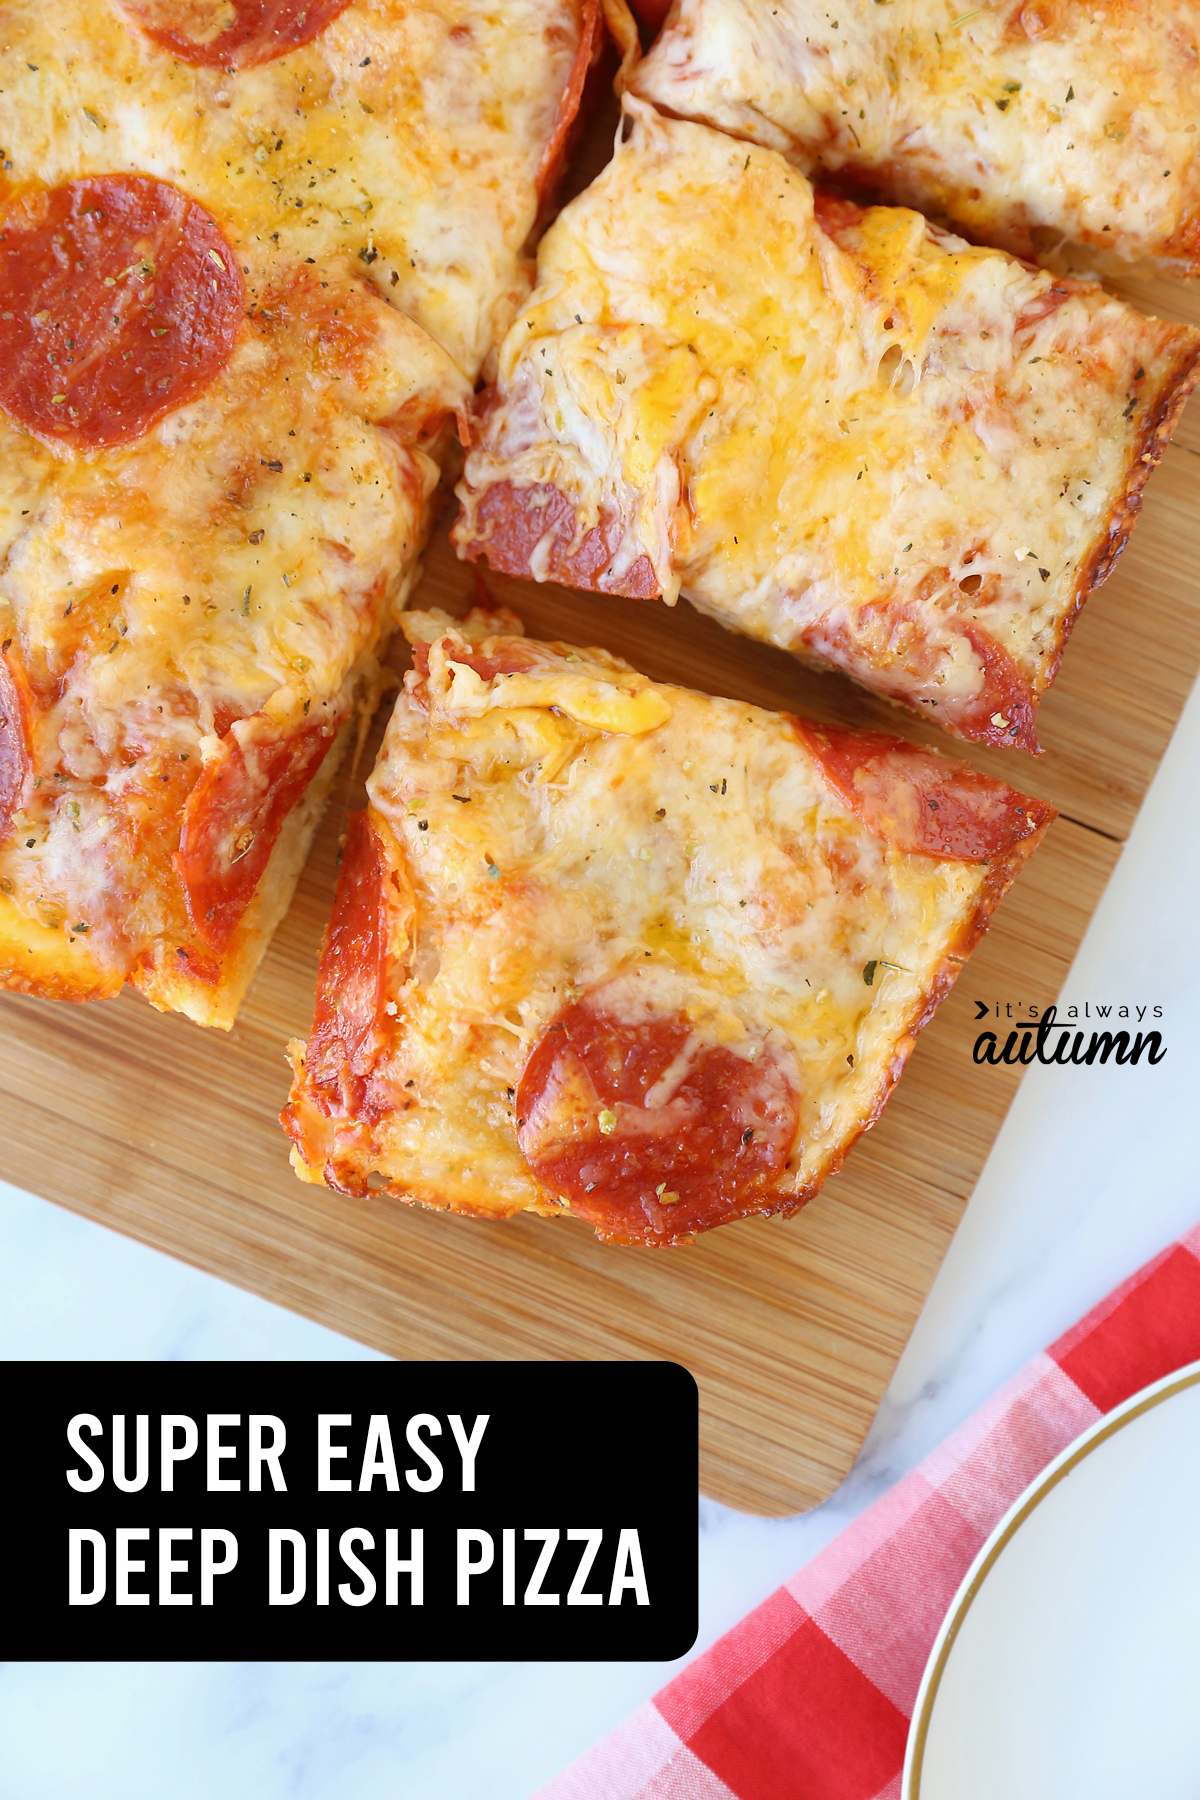 This crazy easy deep dish pizza has a gorgeous this crust that's made with just 4 ingredients!